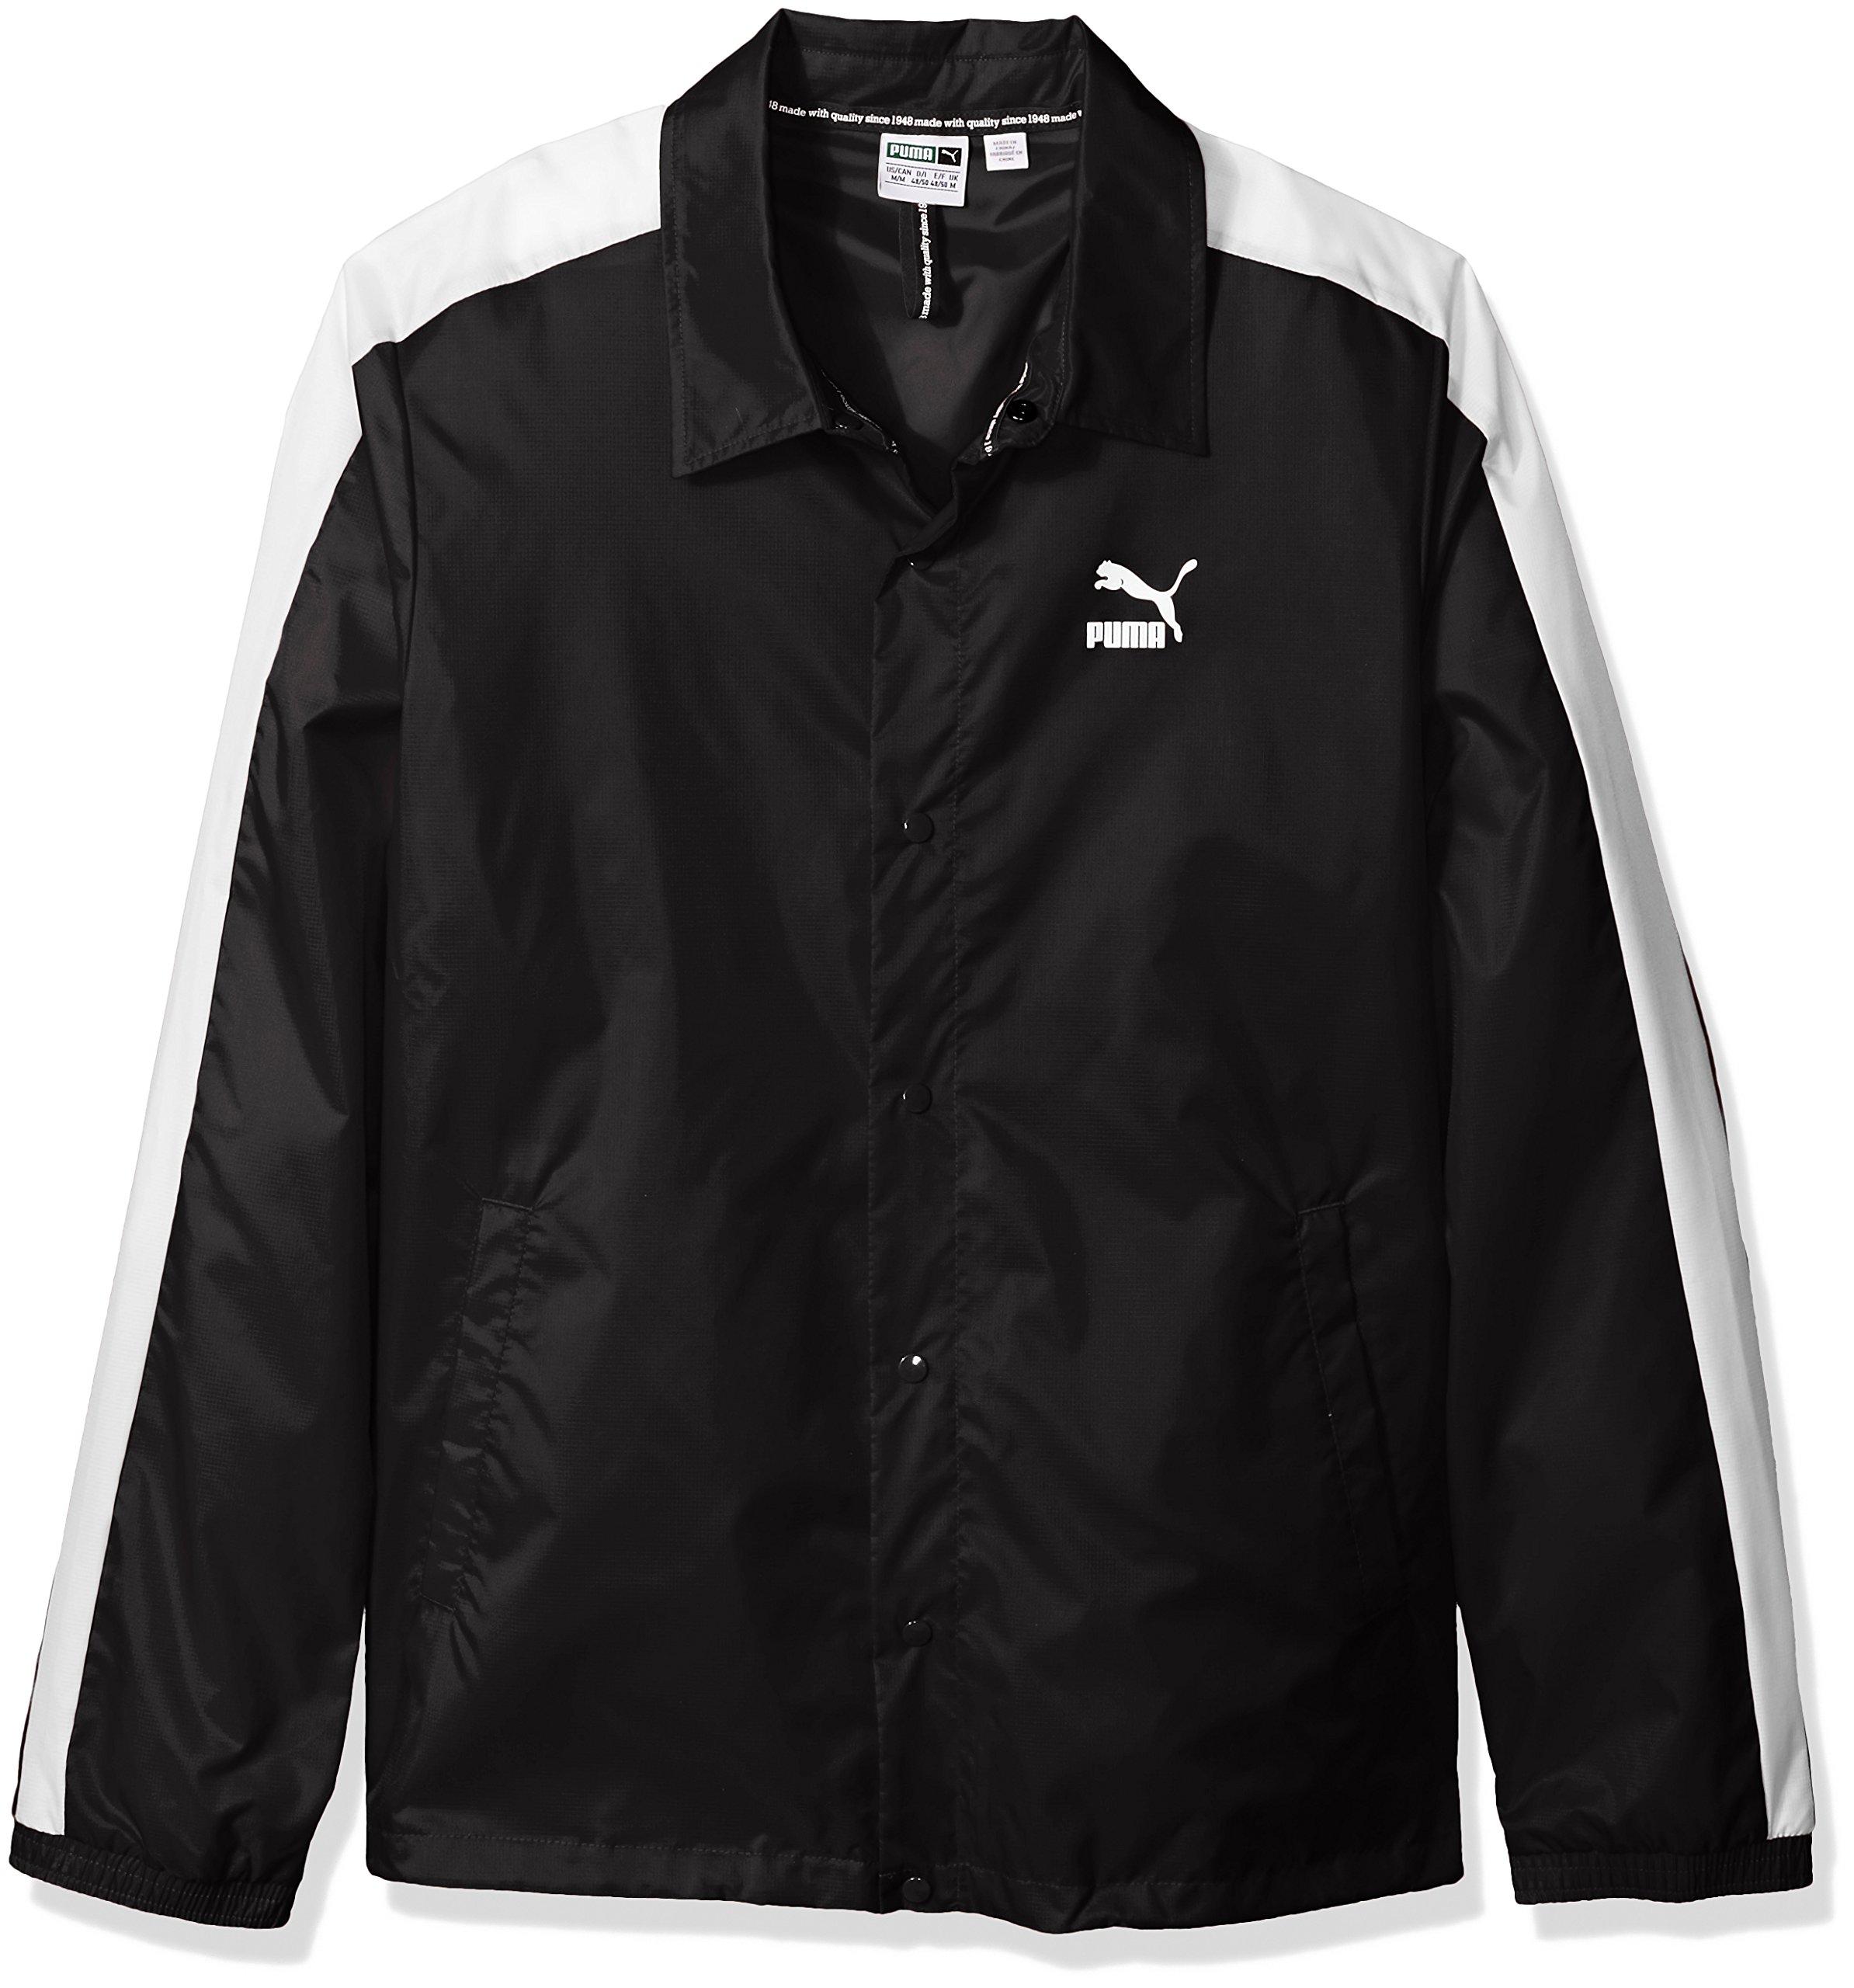 PUMA Synthetic Archive Coach Jacket in Black for Men - Lyst